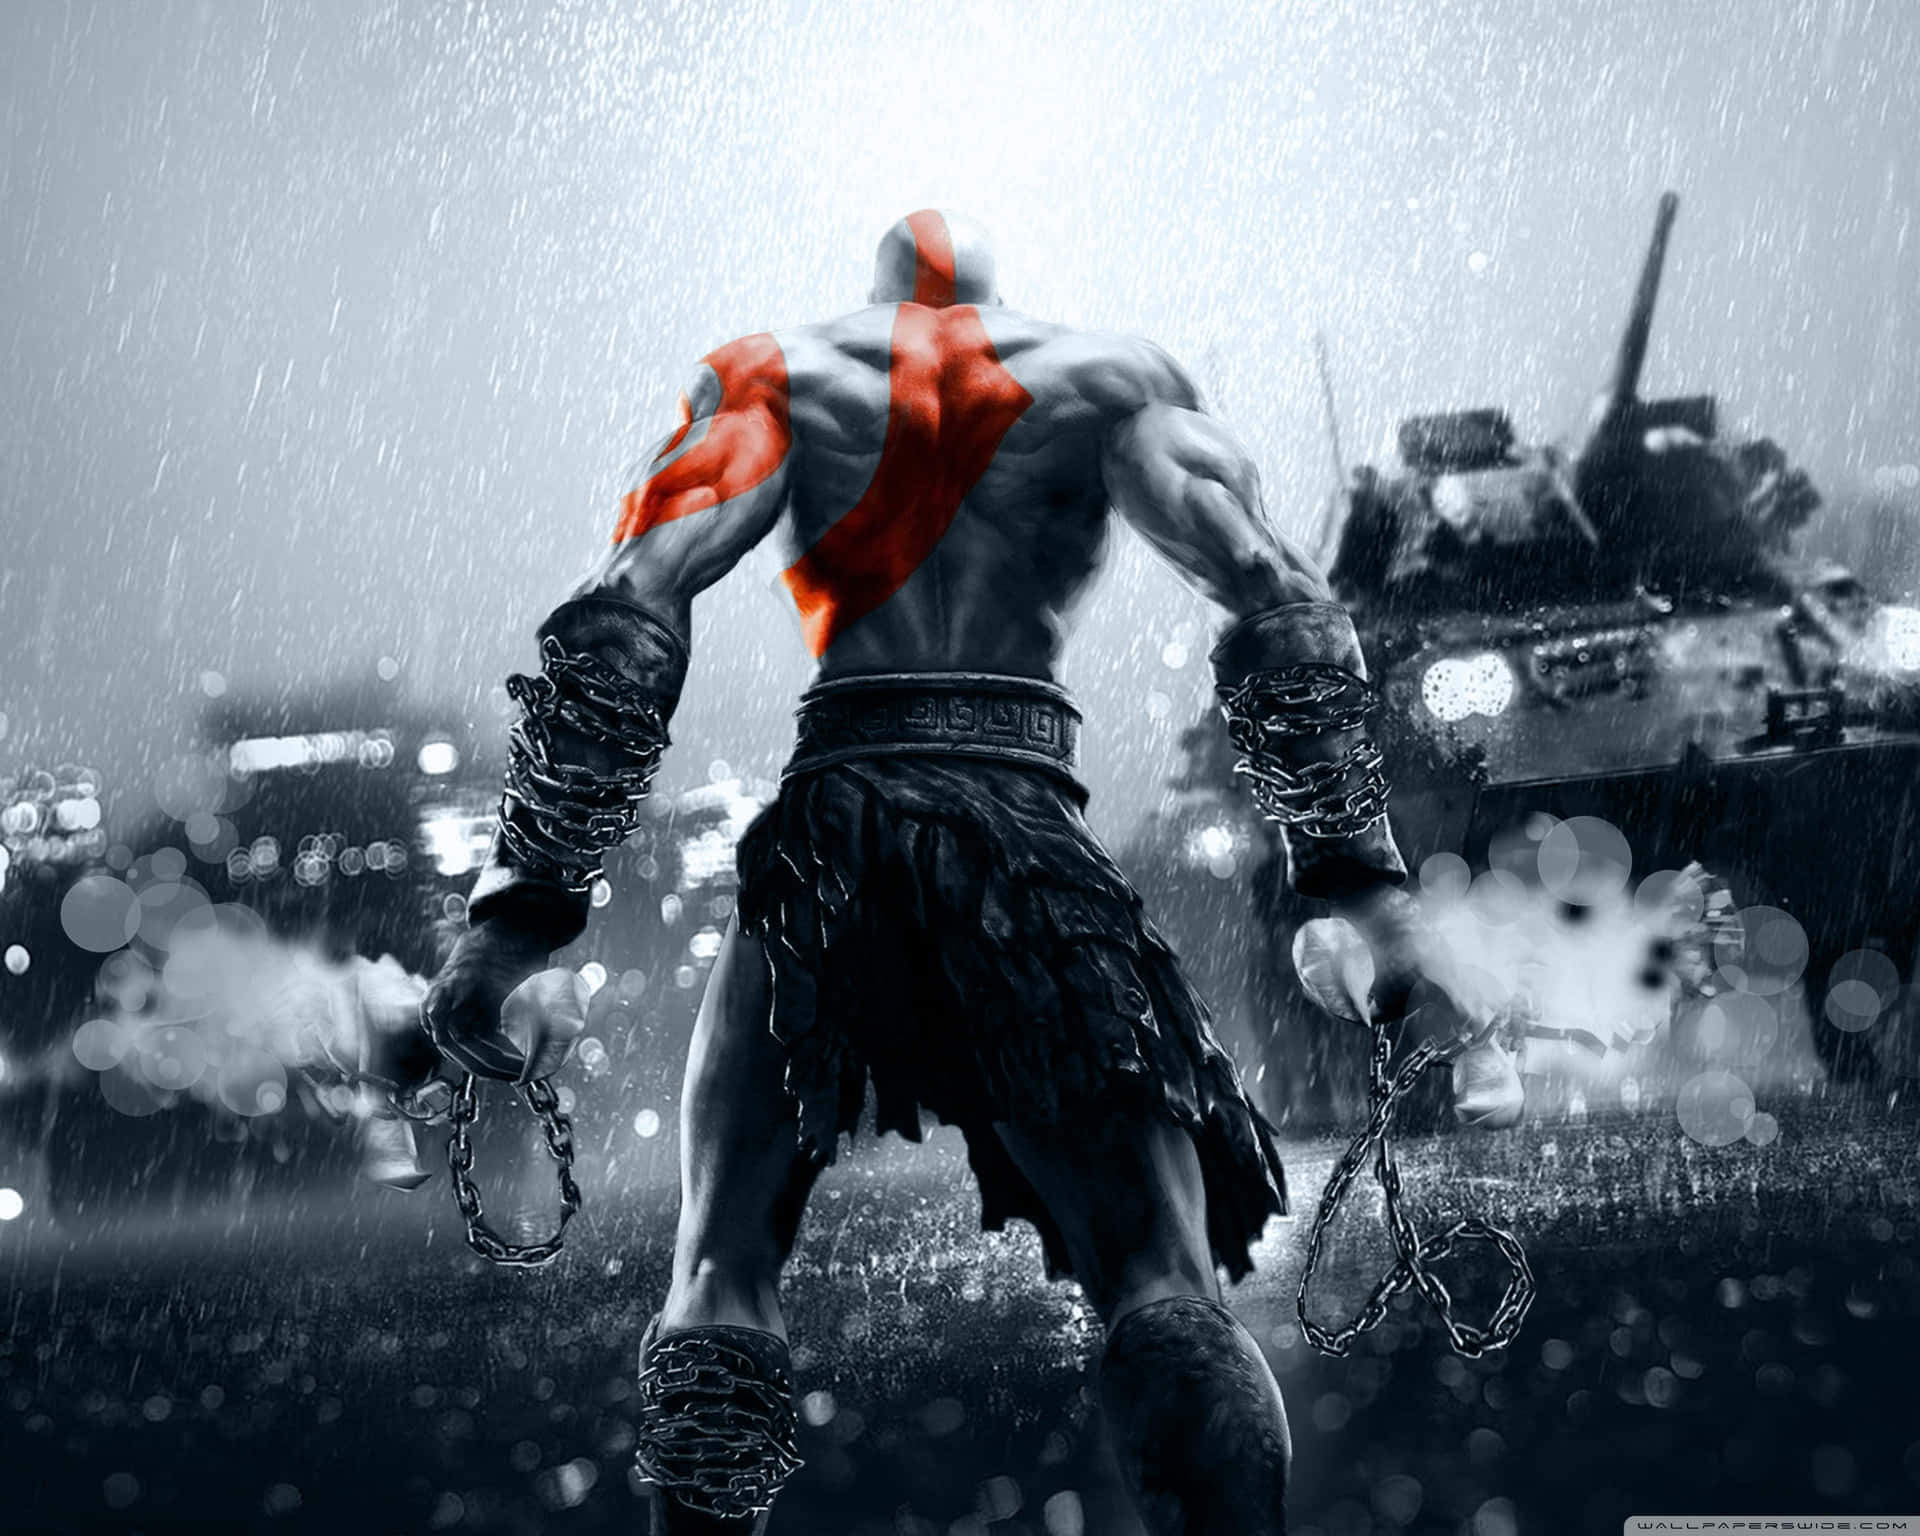 Kratos and Atreus Face a New Challenge in God of War 5 Wallpaper